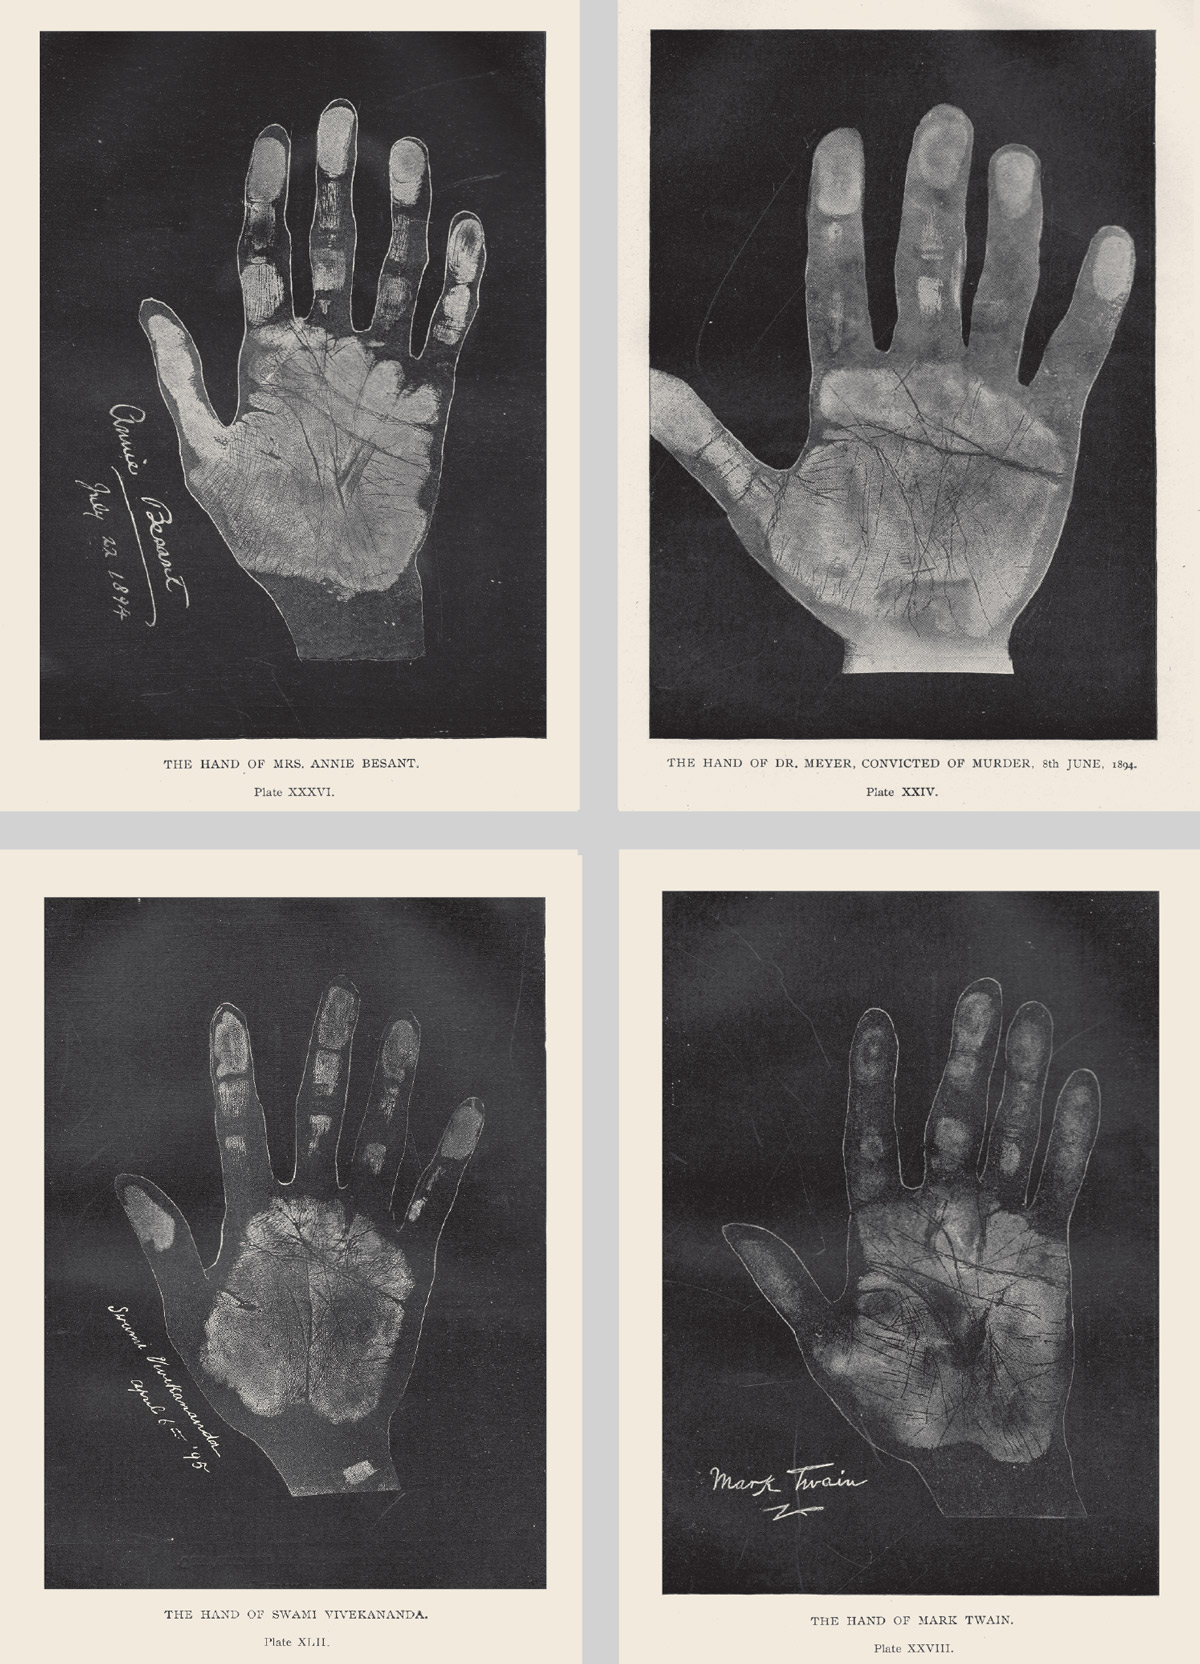 Four handprints from Cheiro’s eighteen ninety four book “Language of the Hand.” Each handprint is that of a notable figure: Mark Twain, Swami Vivekananda, Annie Besant, and convicted murderer Dr. Meyer.